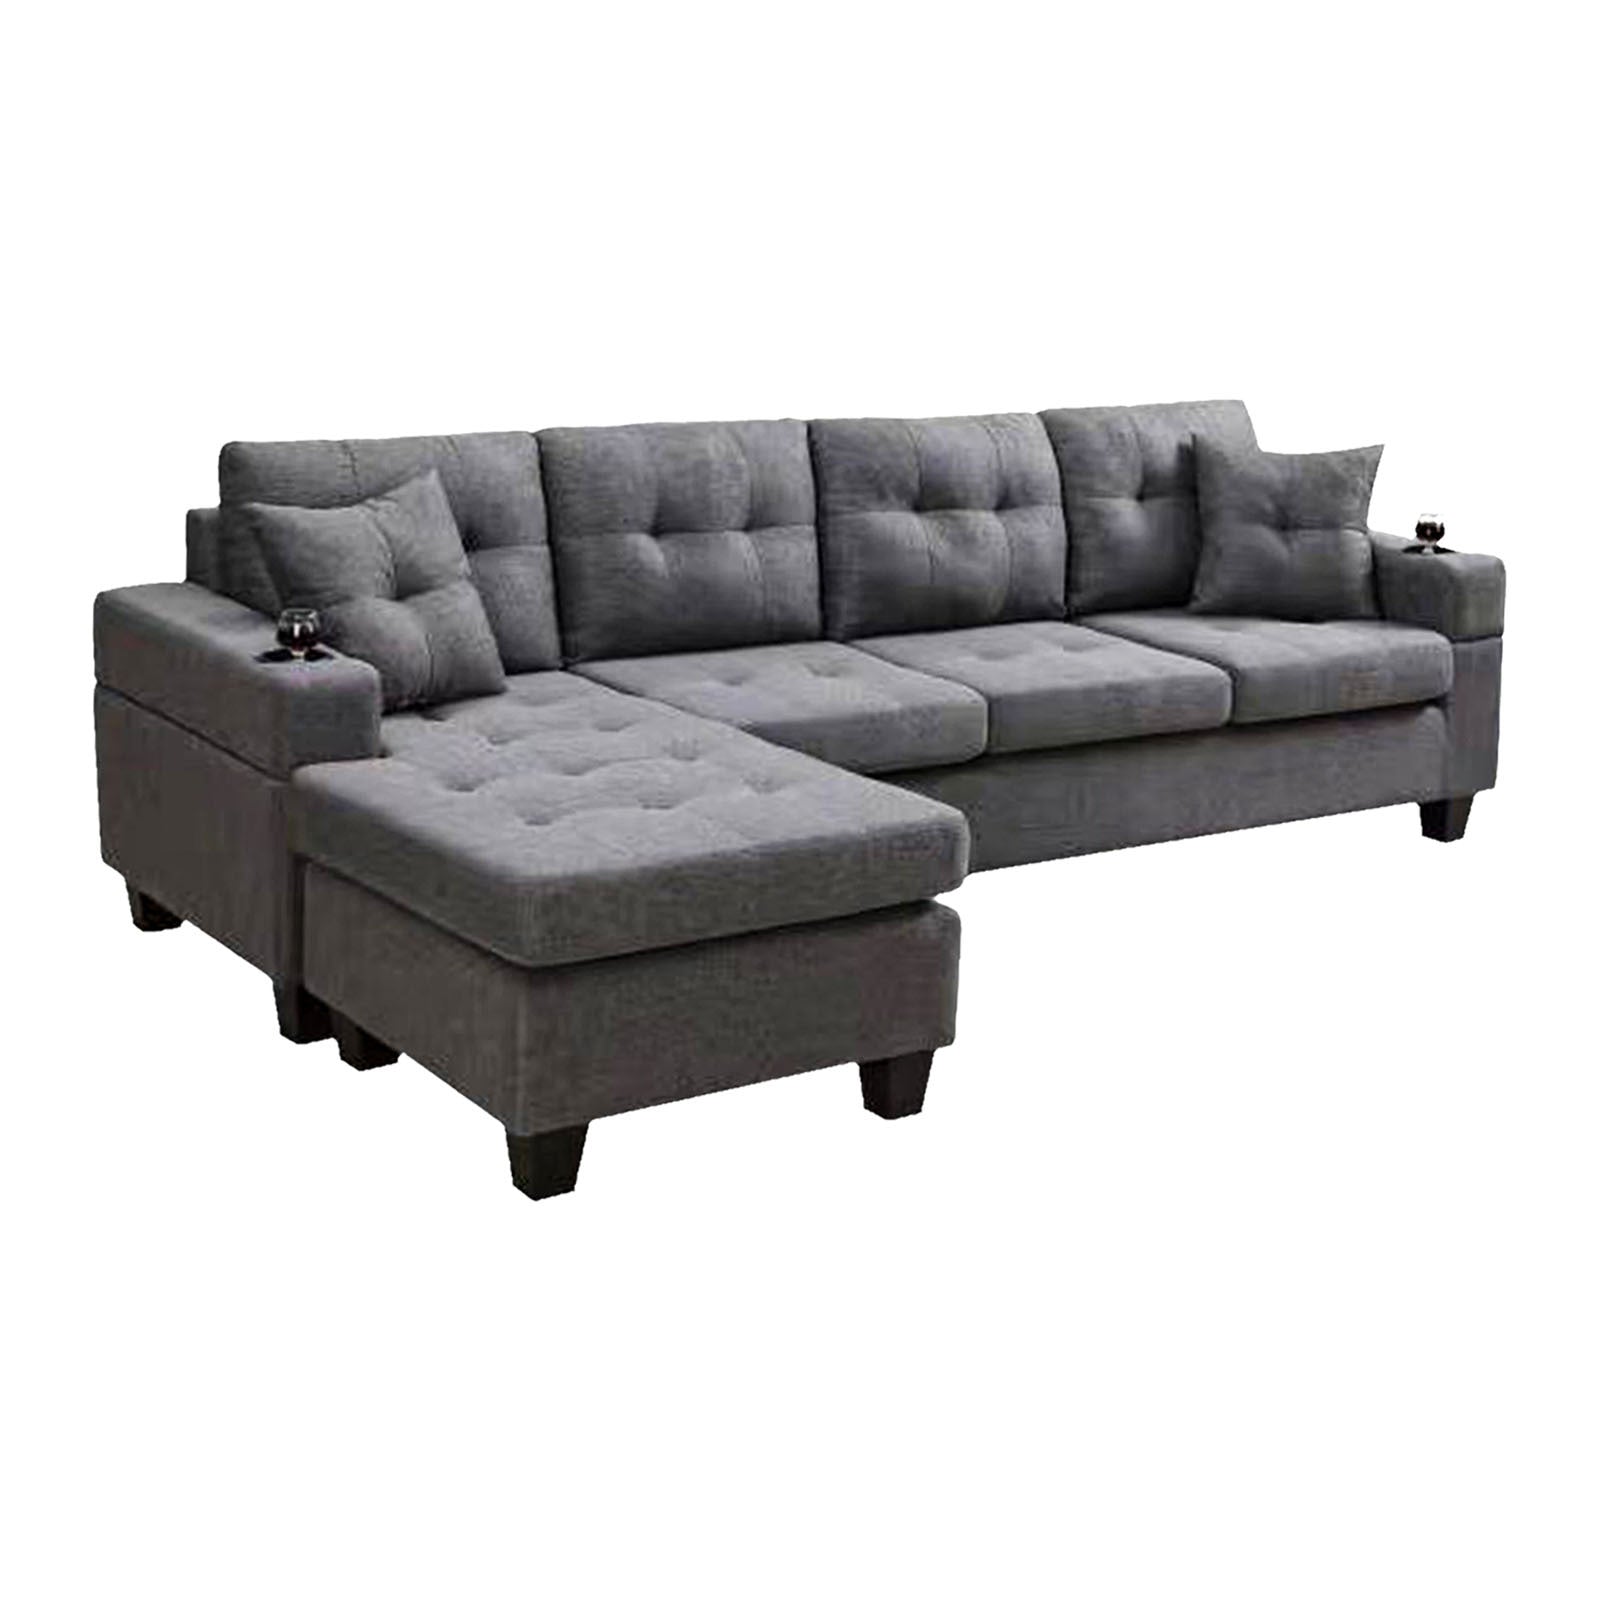 MEGA sectional sofa left with footrest, convertible gray-foam-fabric